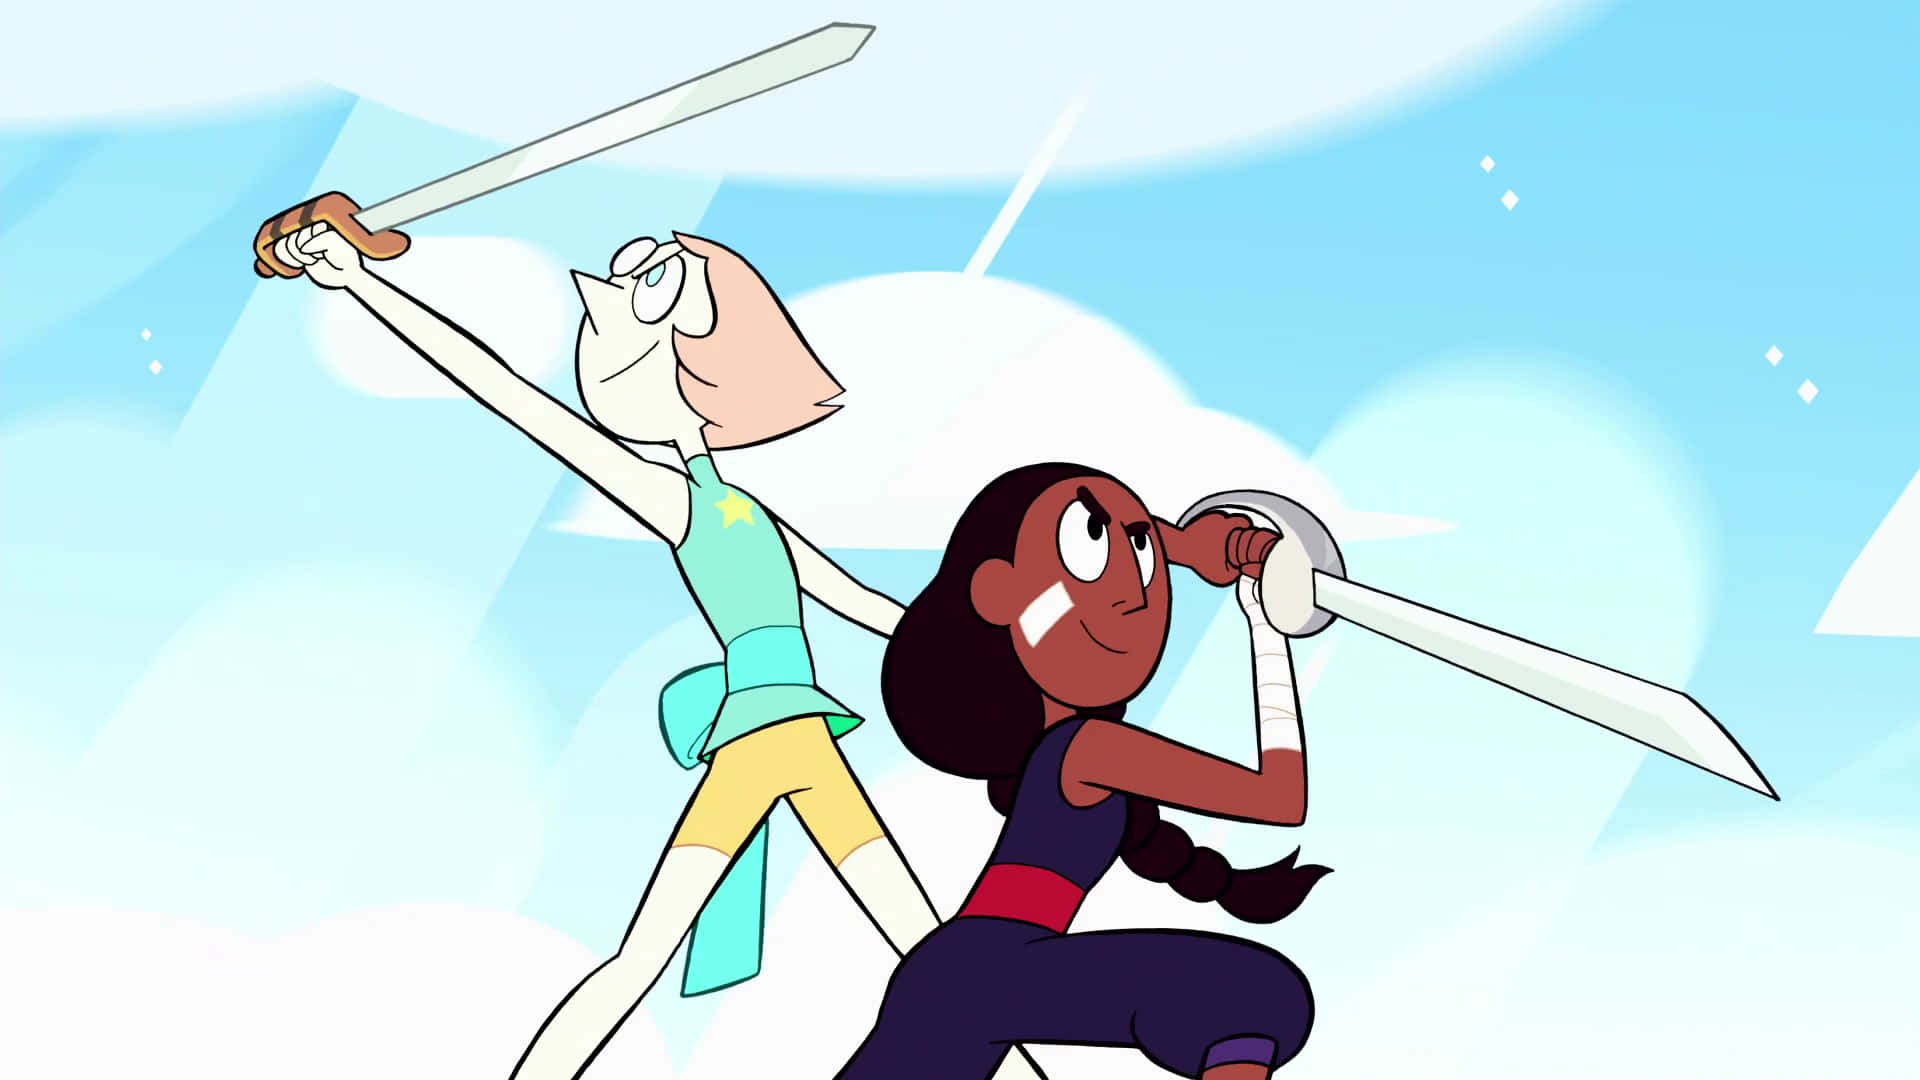 Steven Universe Characters Ready for Adventure Wallpaper